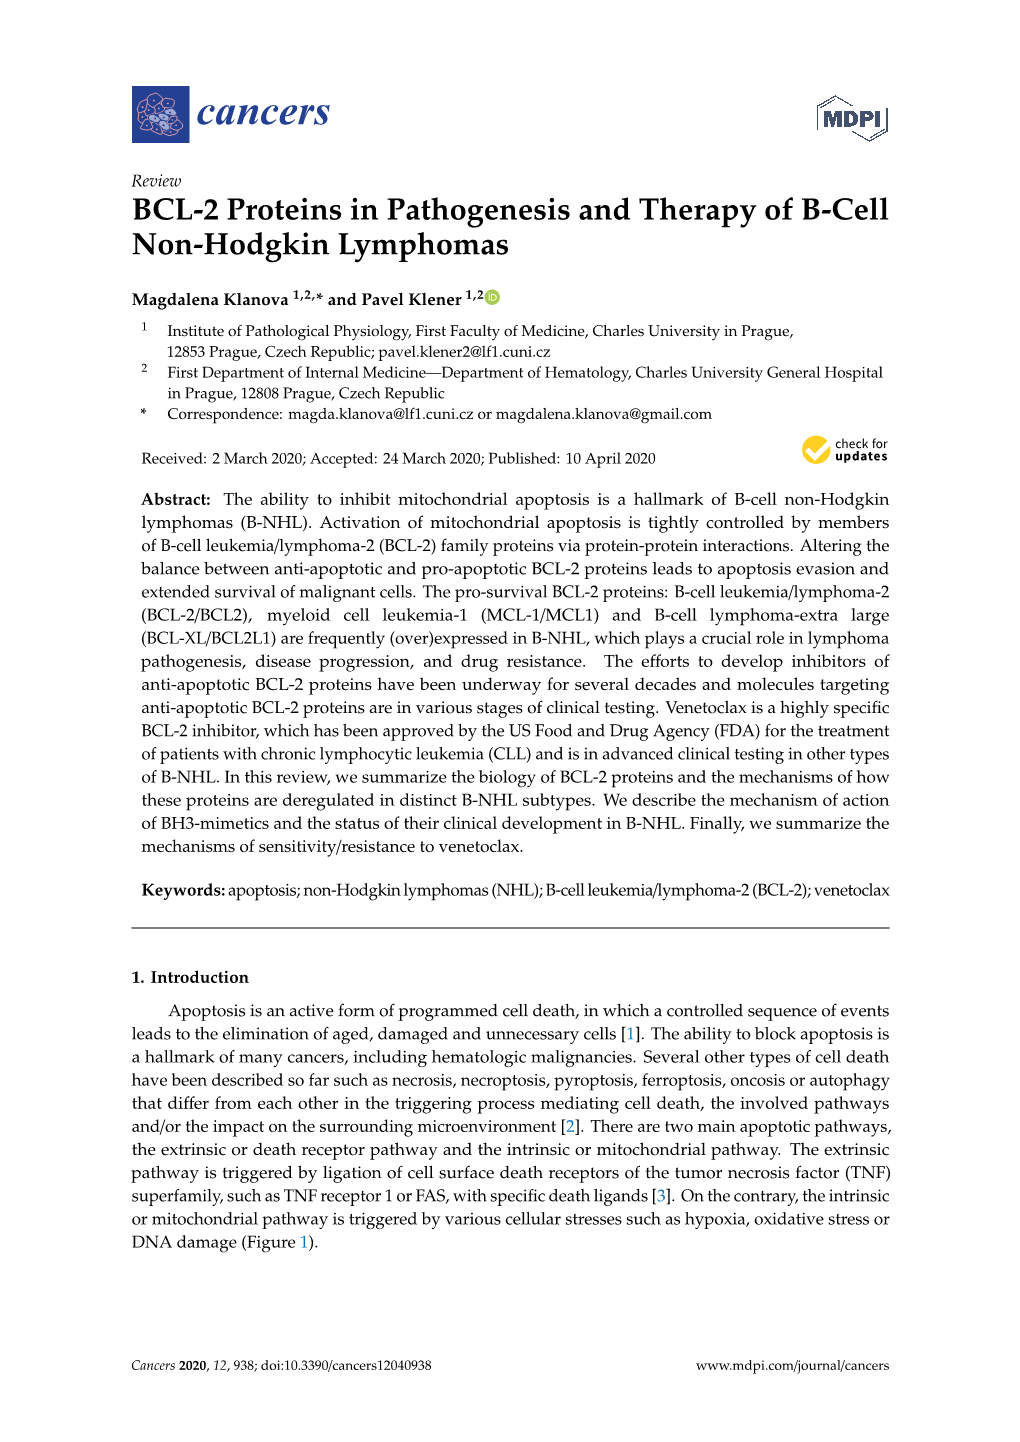 BCL-2 Proteins in Pathogenesis and Therapy of B-Cell Non-Hodgkin Lymphomas